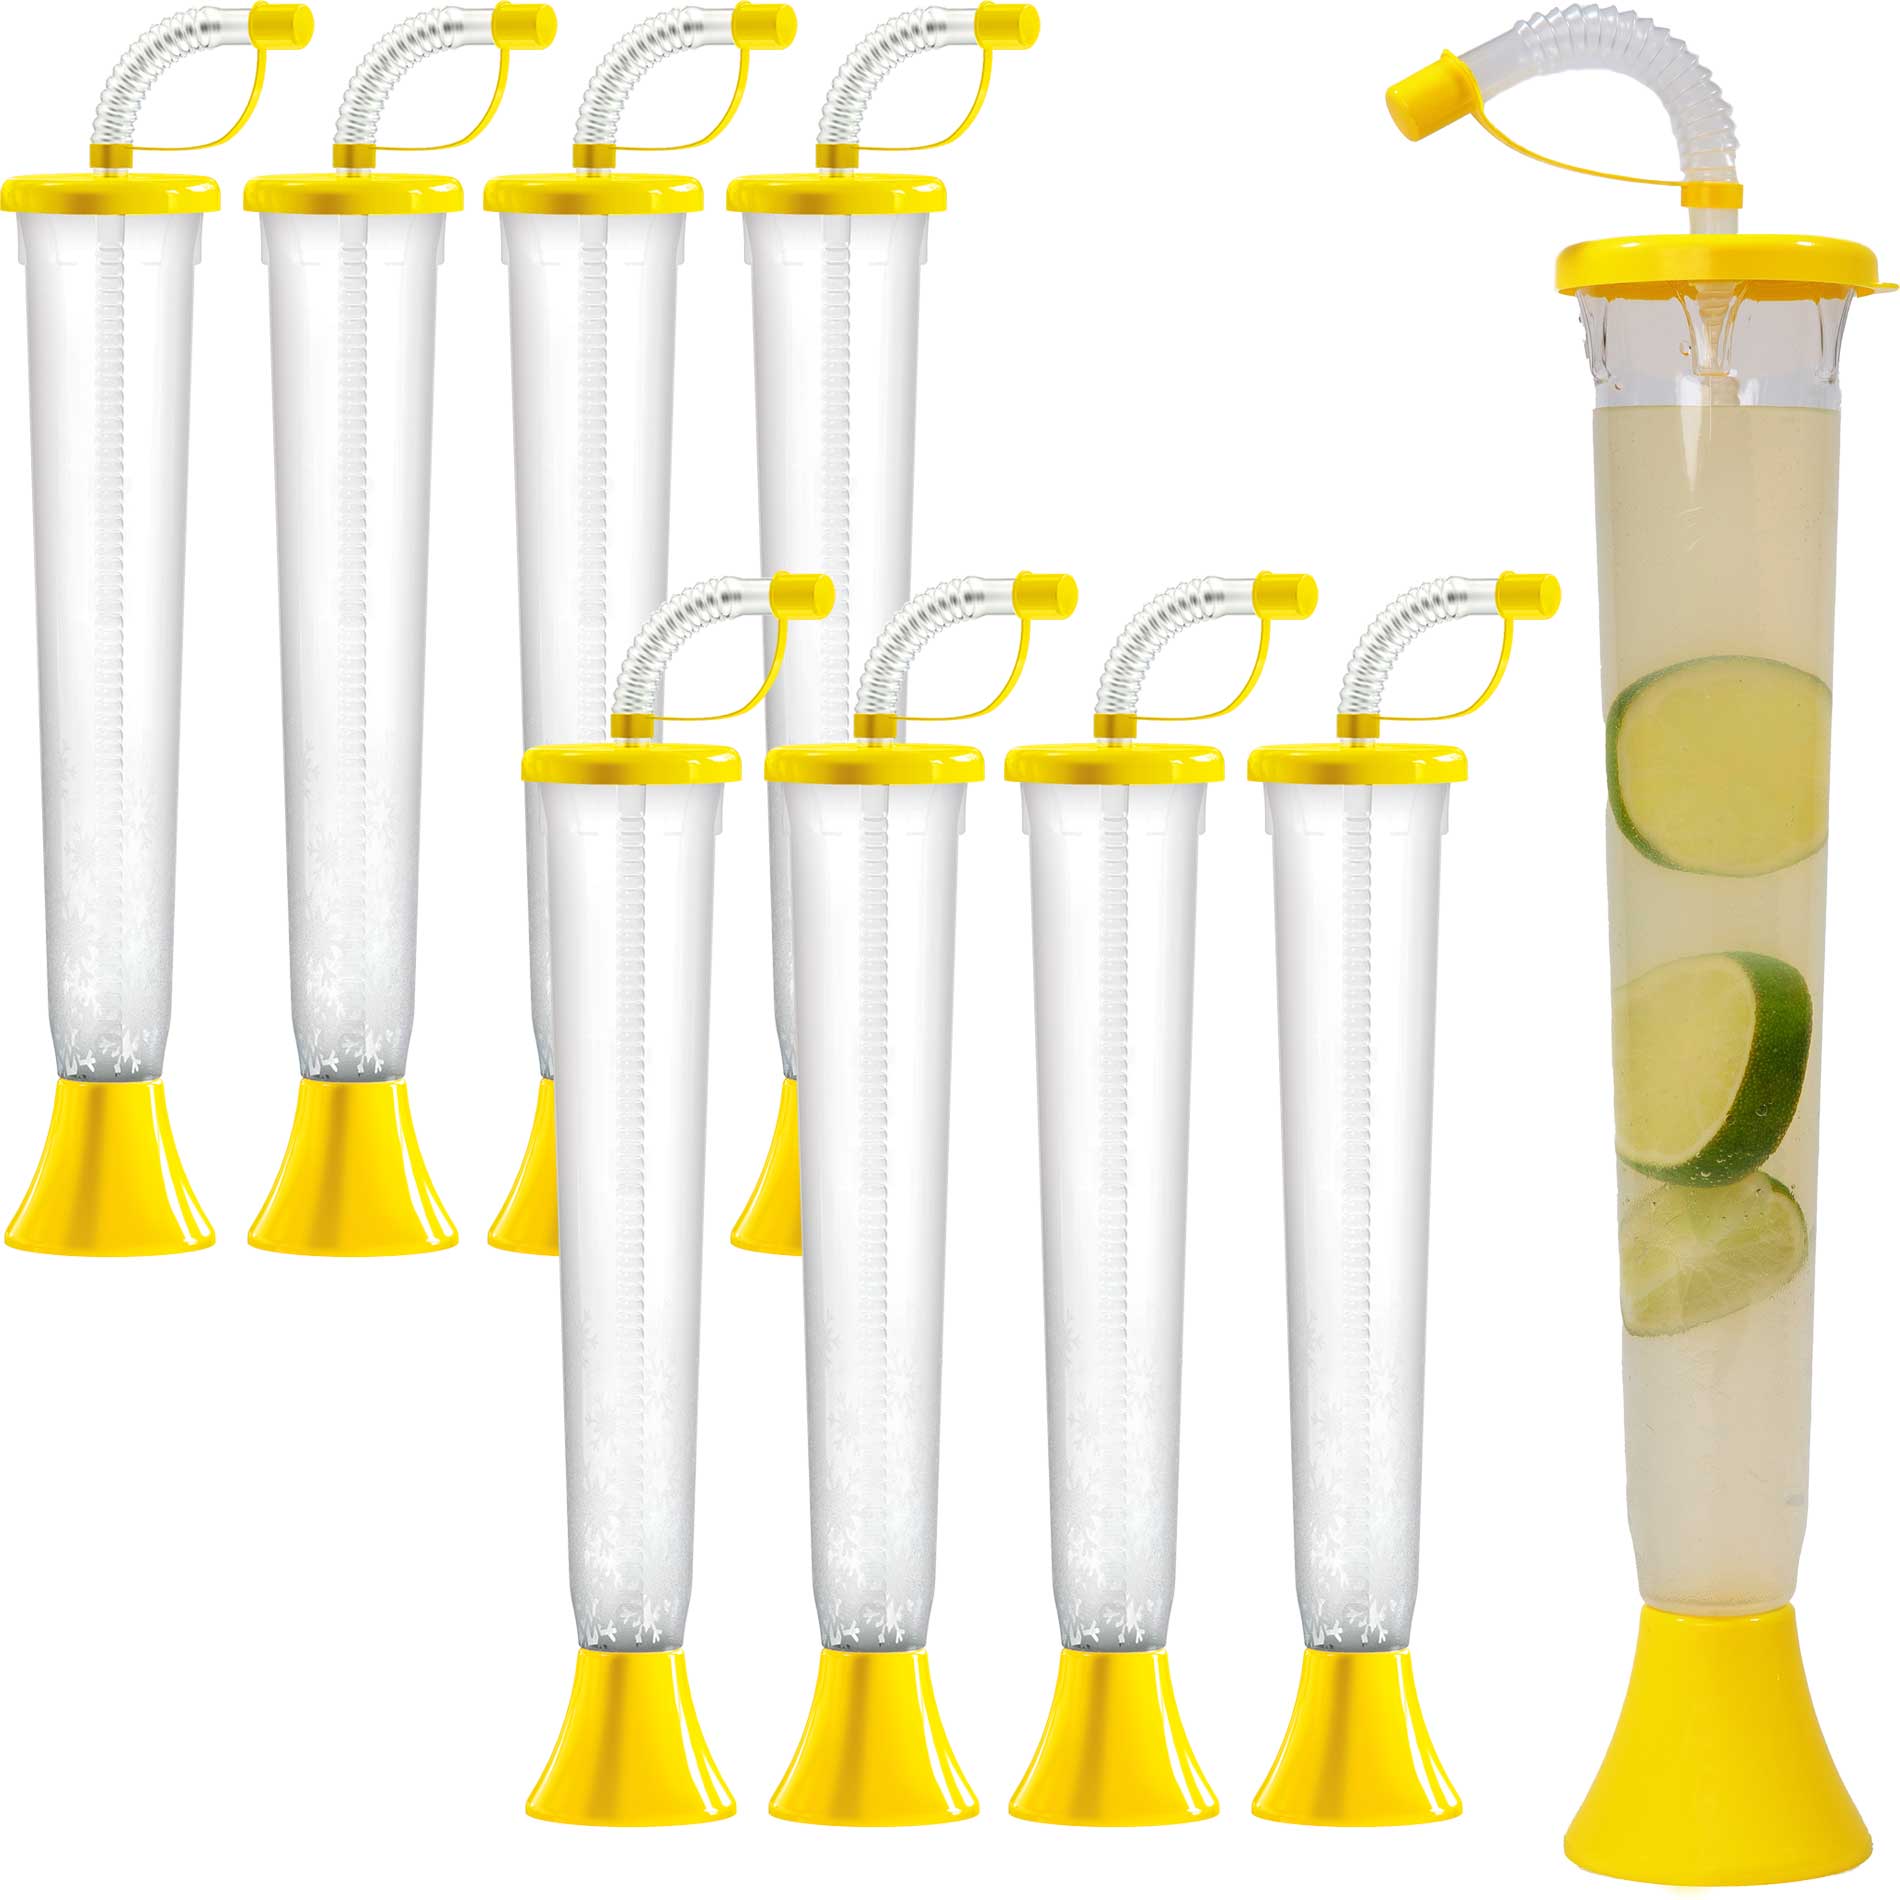 Sweet World USA Yard Cups (54 or 108 Cups) Yard Cups with YELLOW Lids and Straws - 14oz - for Margaritas and Frozen Drinks cups with lids and straws